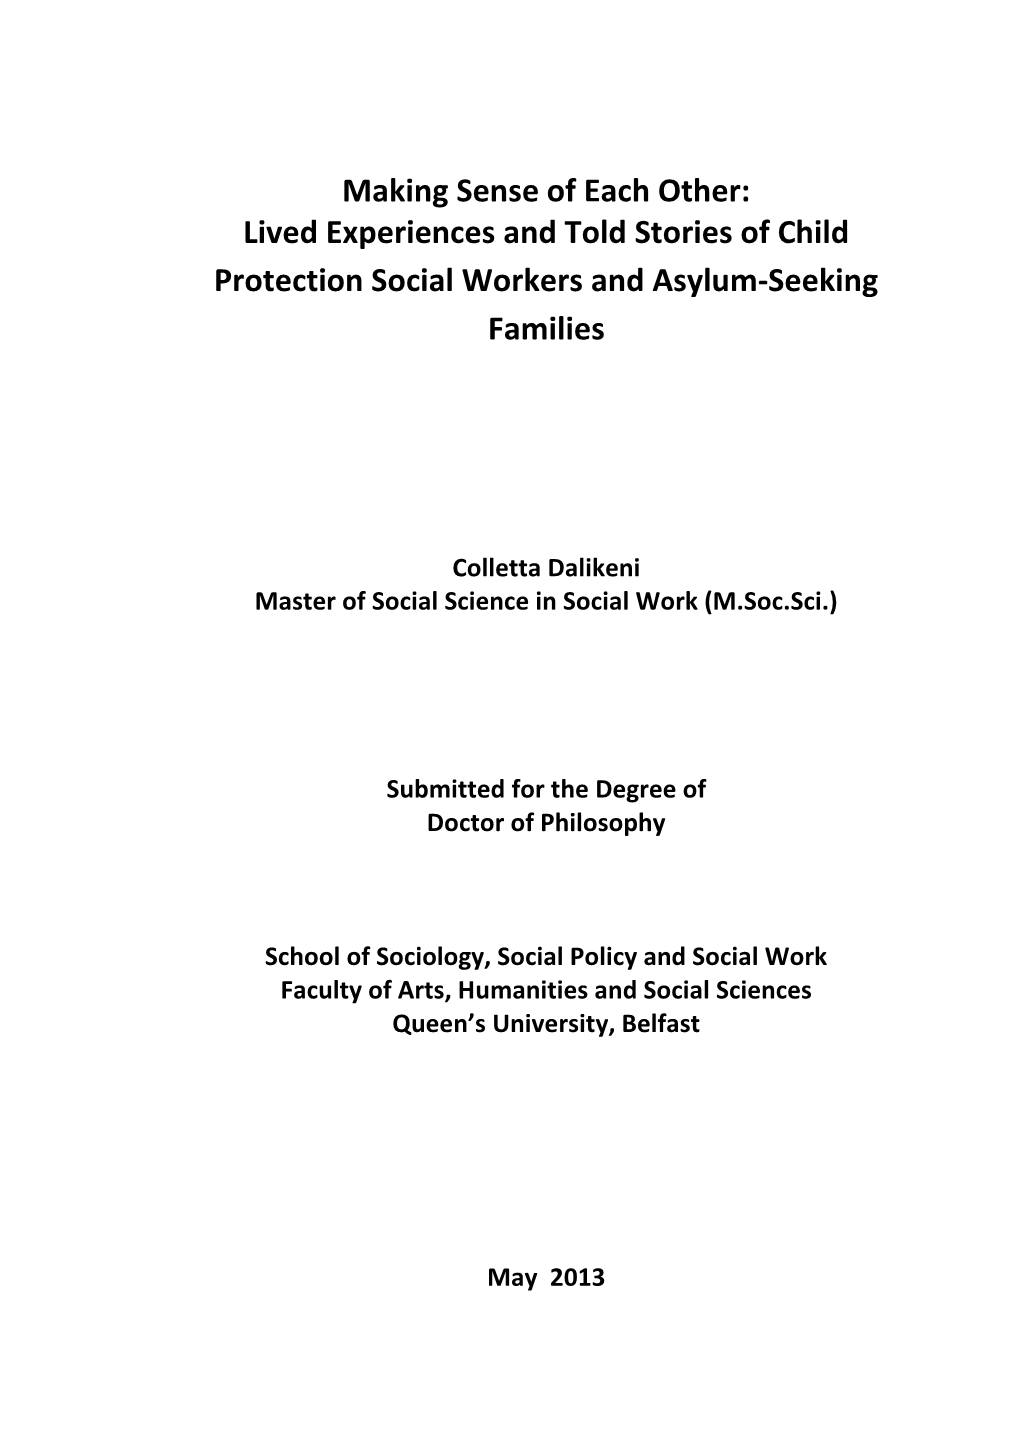 Lived Experiences and Told Stories of Child Protection Social Workers and Asylum-Seeking Families